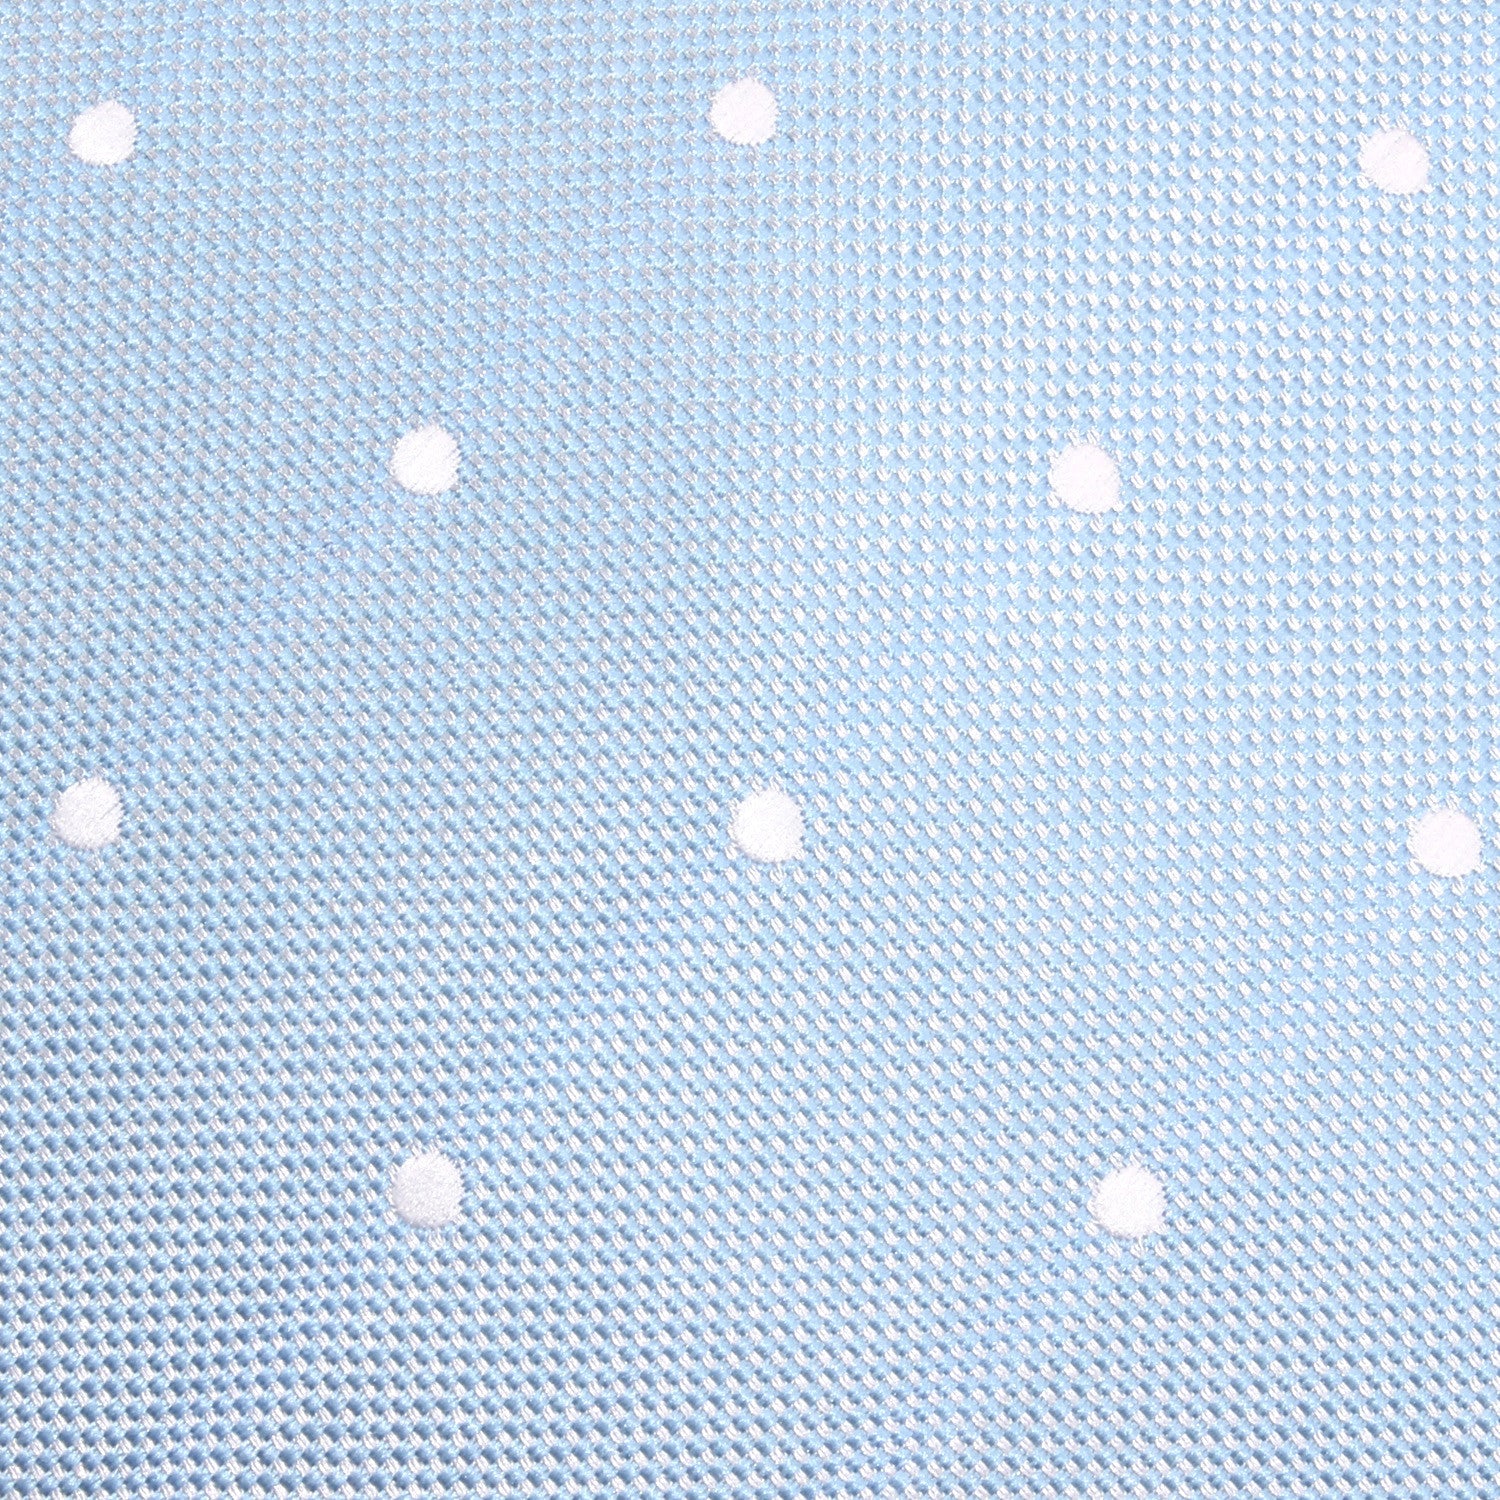 Mint Blue with White Polka Dots Skinny Tie Fabric